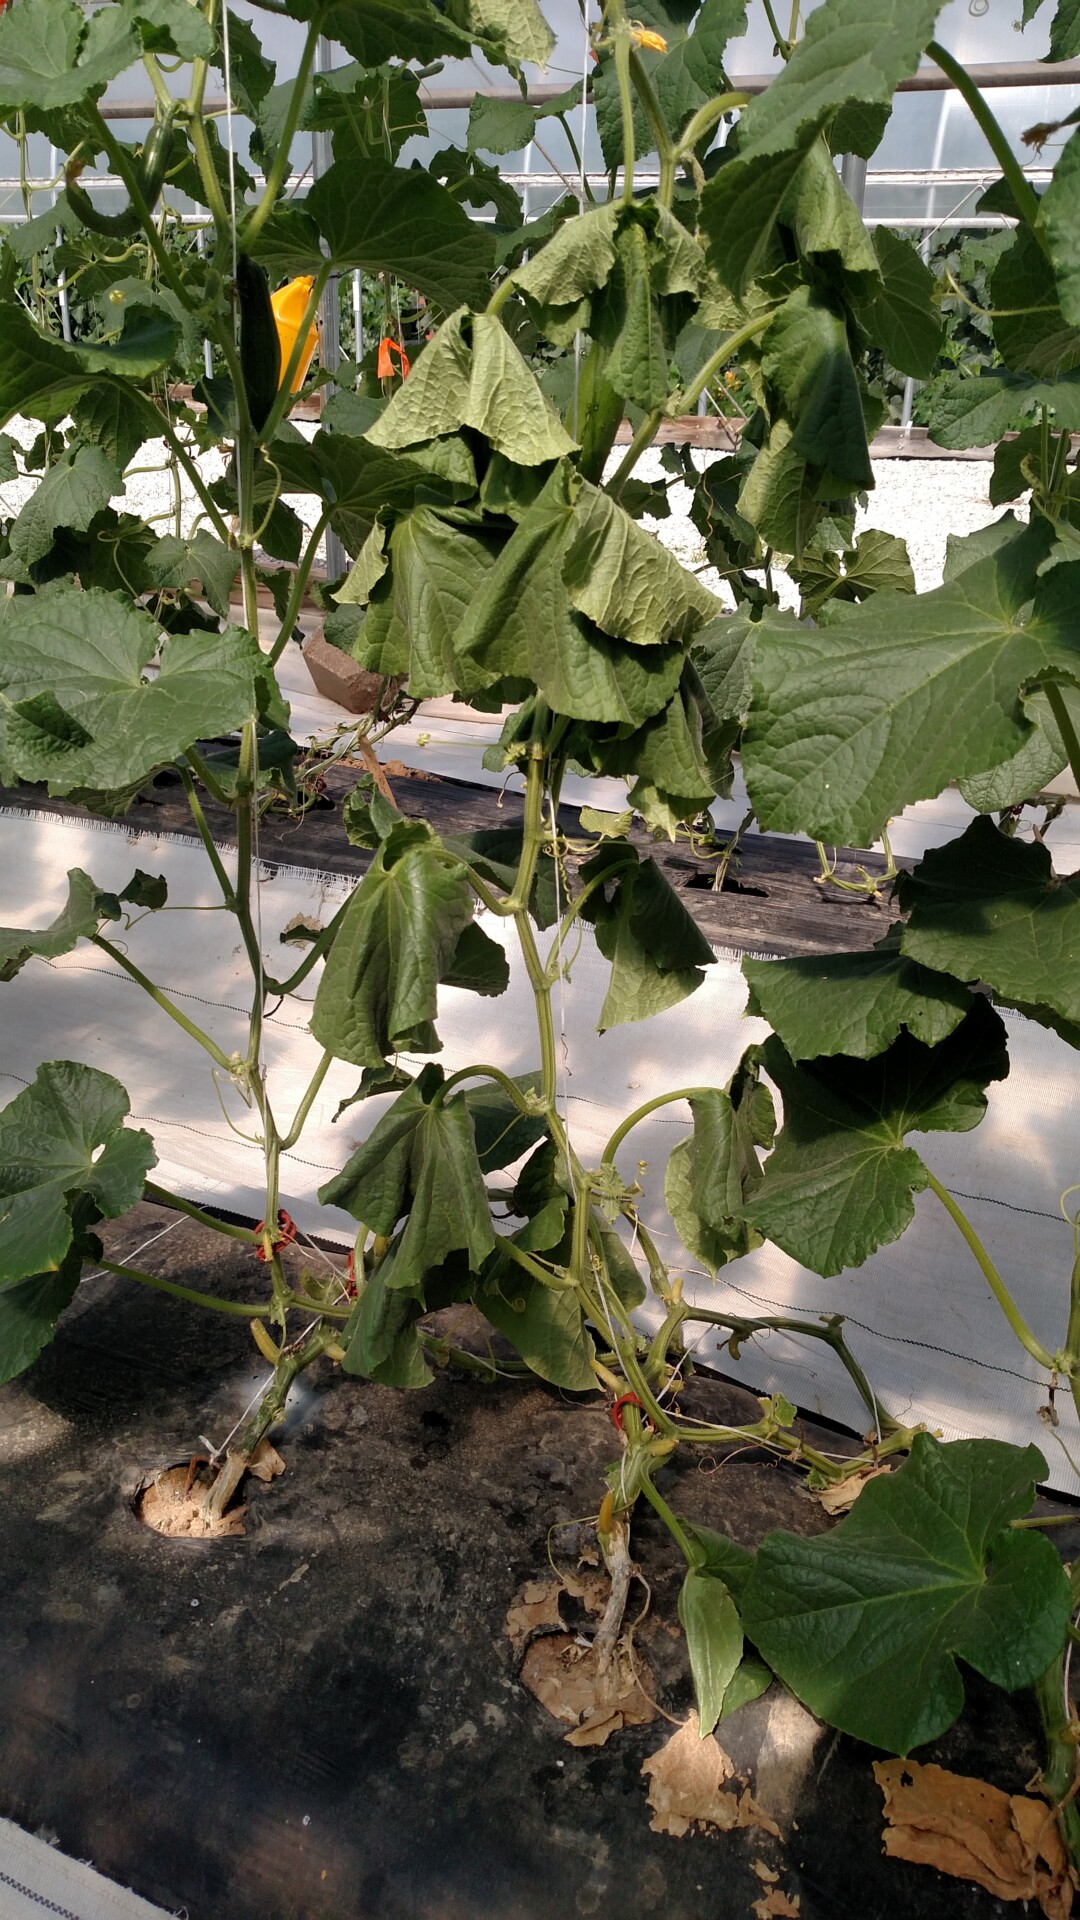 Charcoal rot of cucumber. Plant wilt is visible and lesion on lower stem.